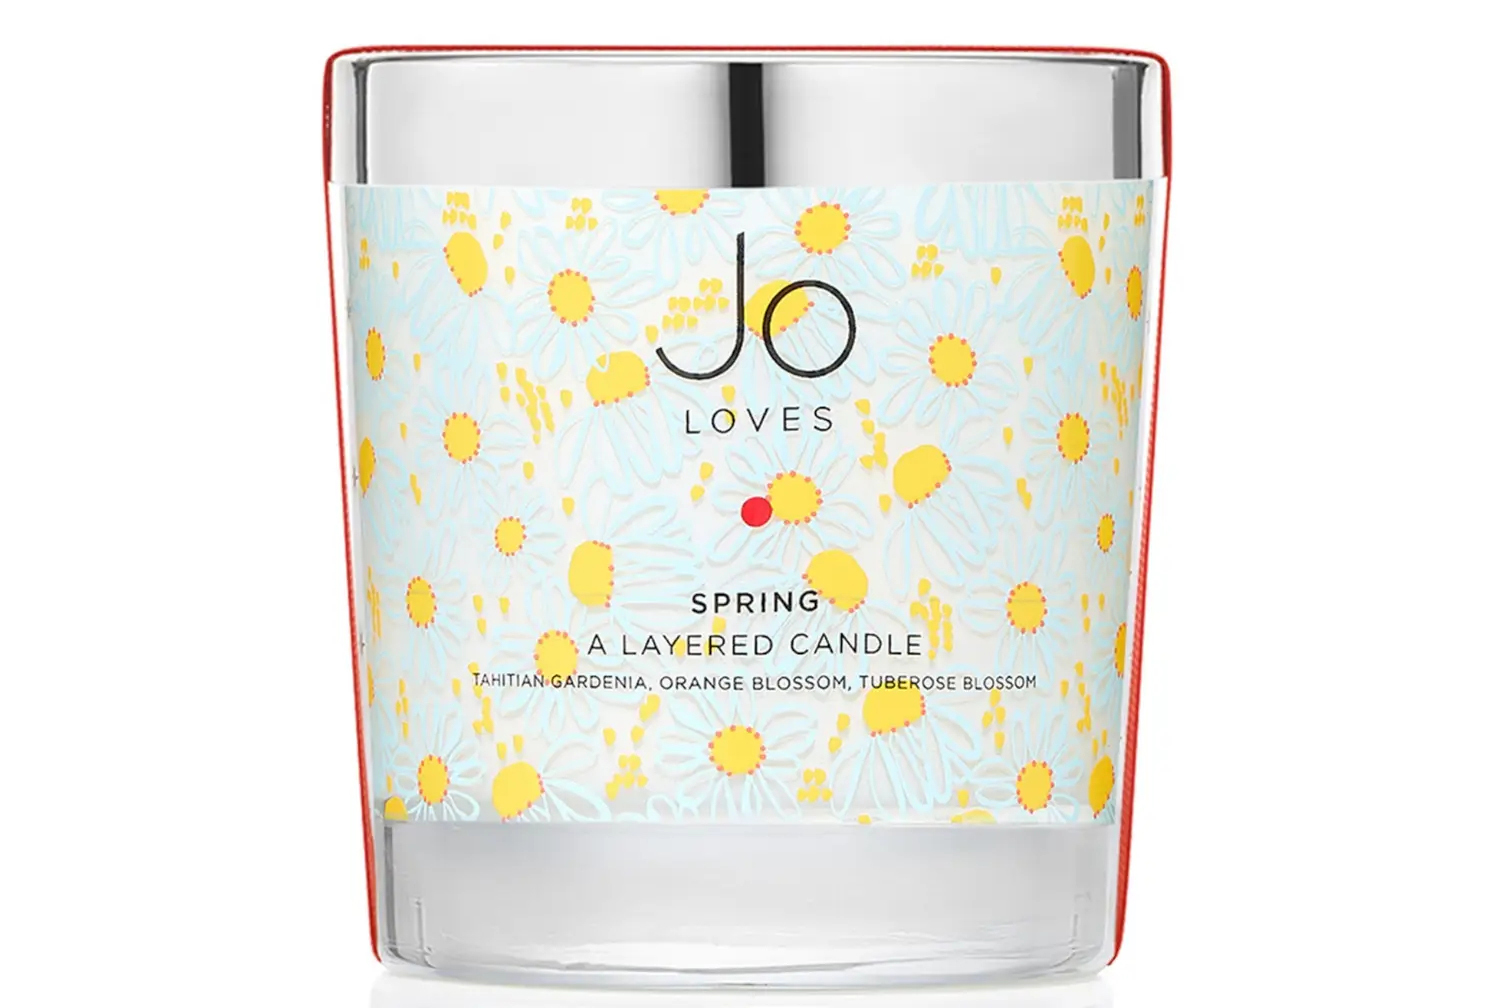 Jo Loves A Spring Layered Candle